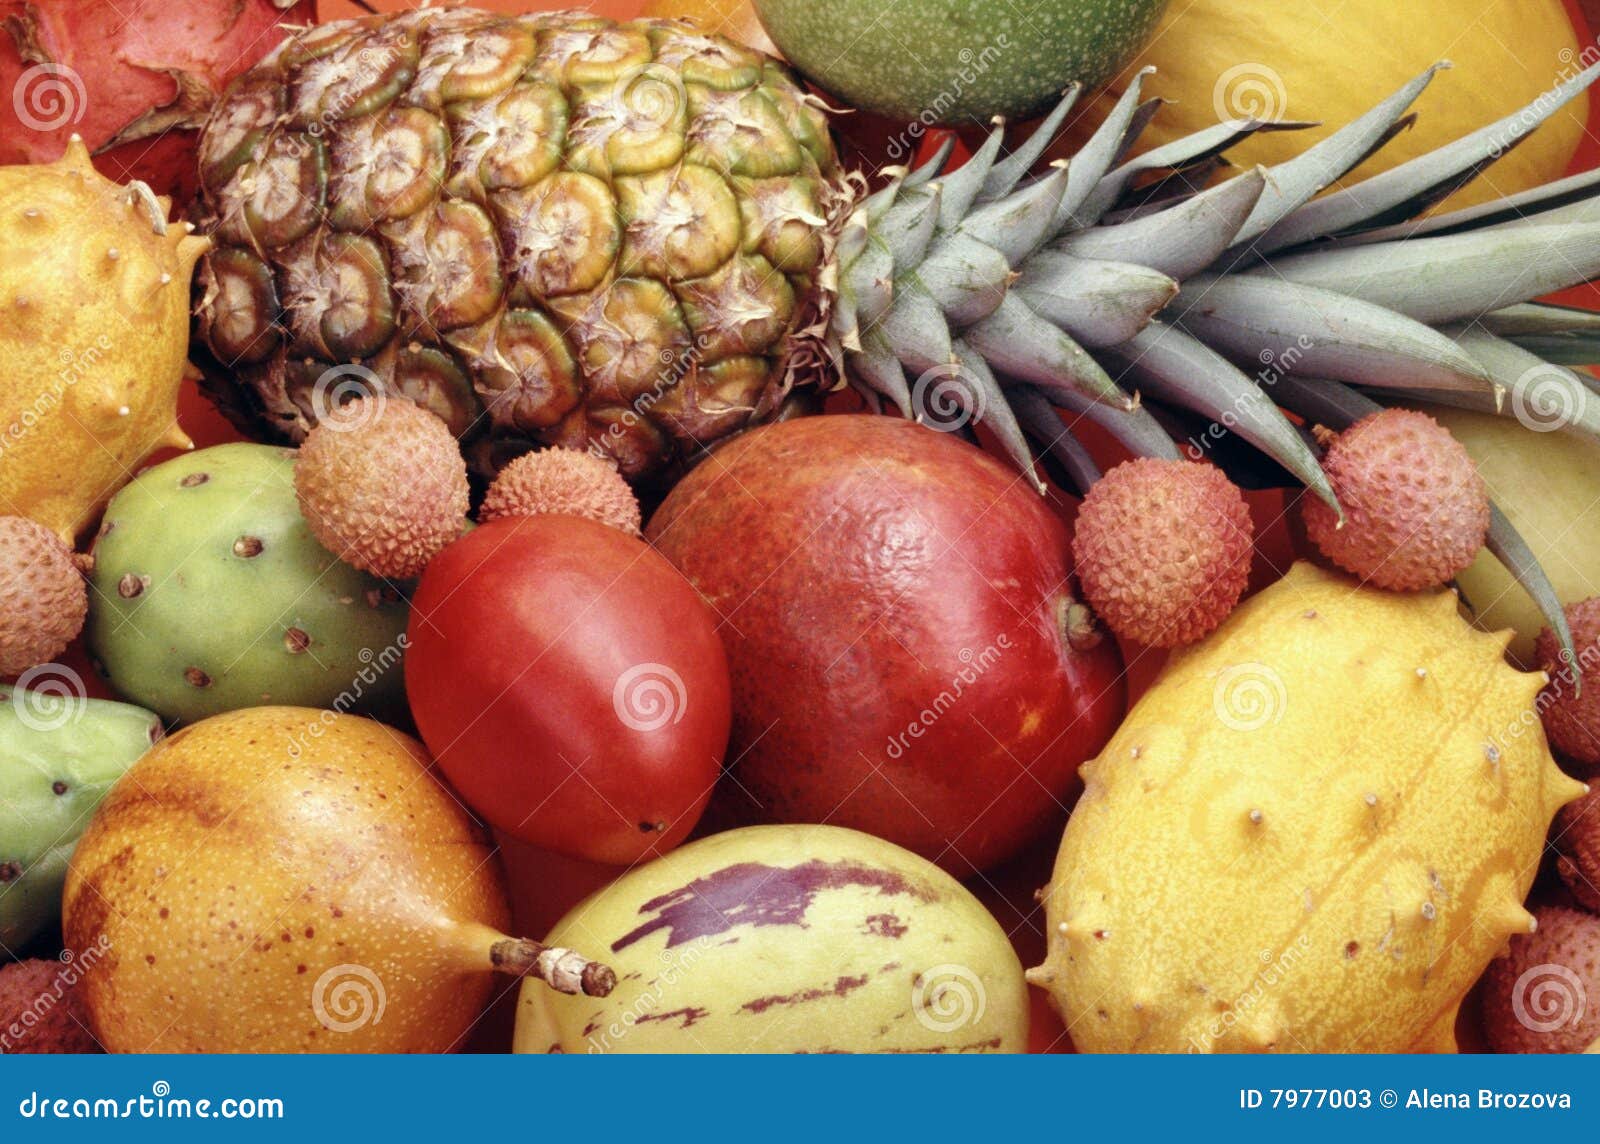 Tropical Fruits And Vegetables Stock Image Image Of